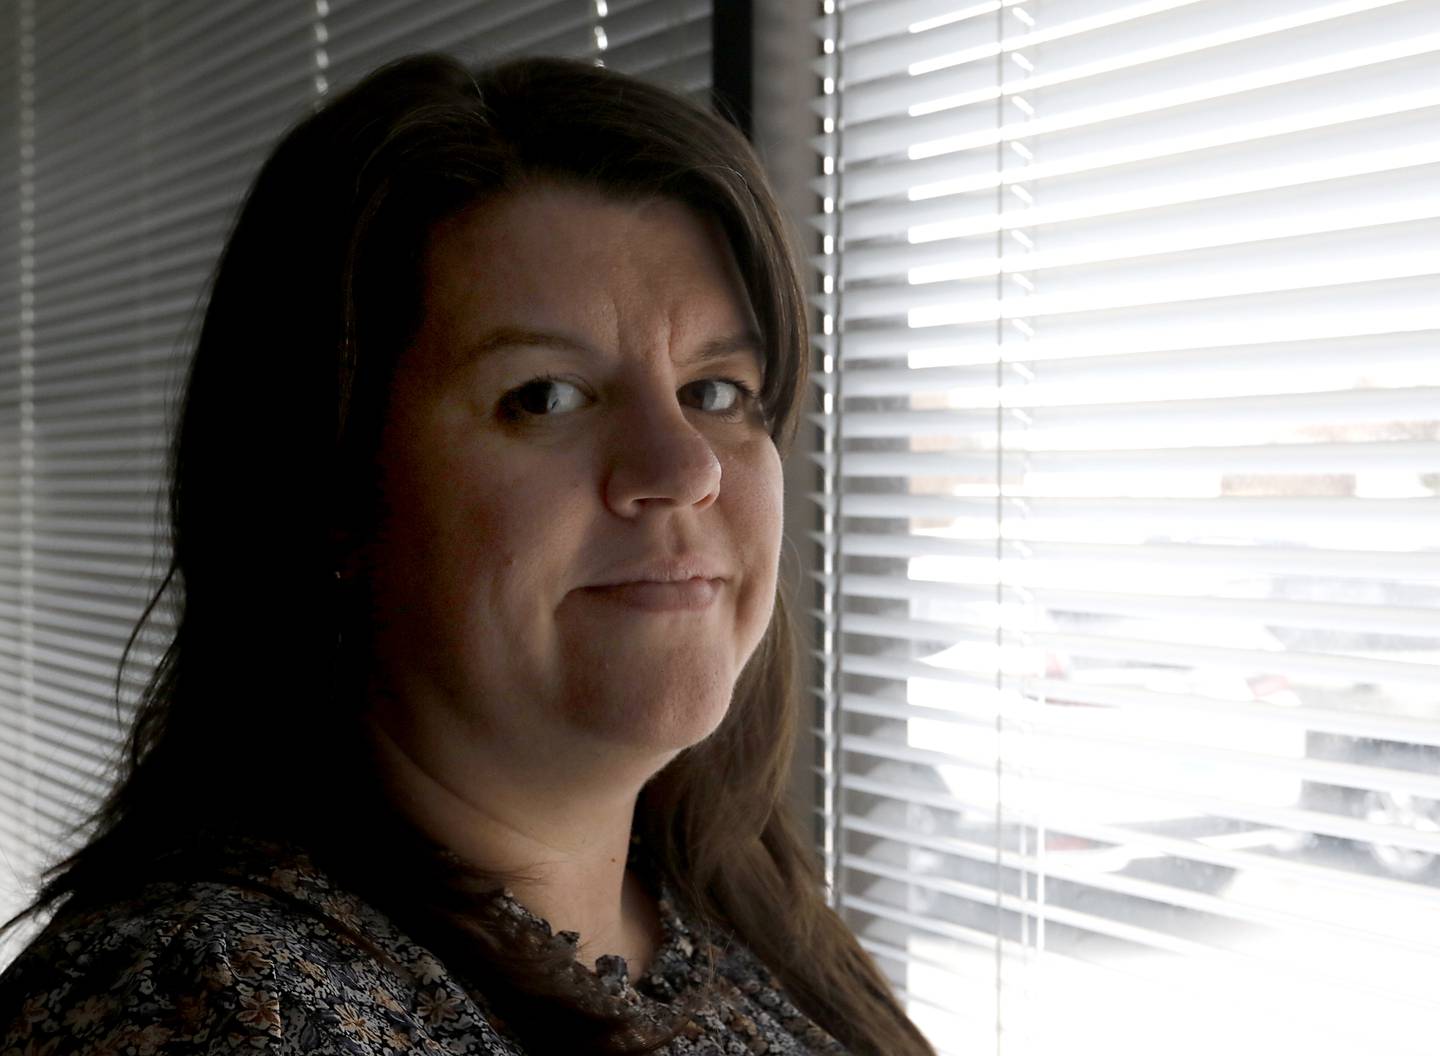 Rebecca Plascencia, 41, of Chicago, is the deputy director of Northwest Center Against Sexual Assault and also a survivor of a sexual assault. She was assaulted in 2007, when she was 26 years old over the St. Patrick’s Day weekend.